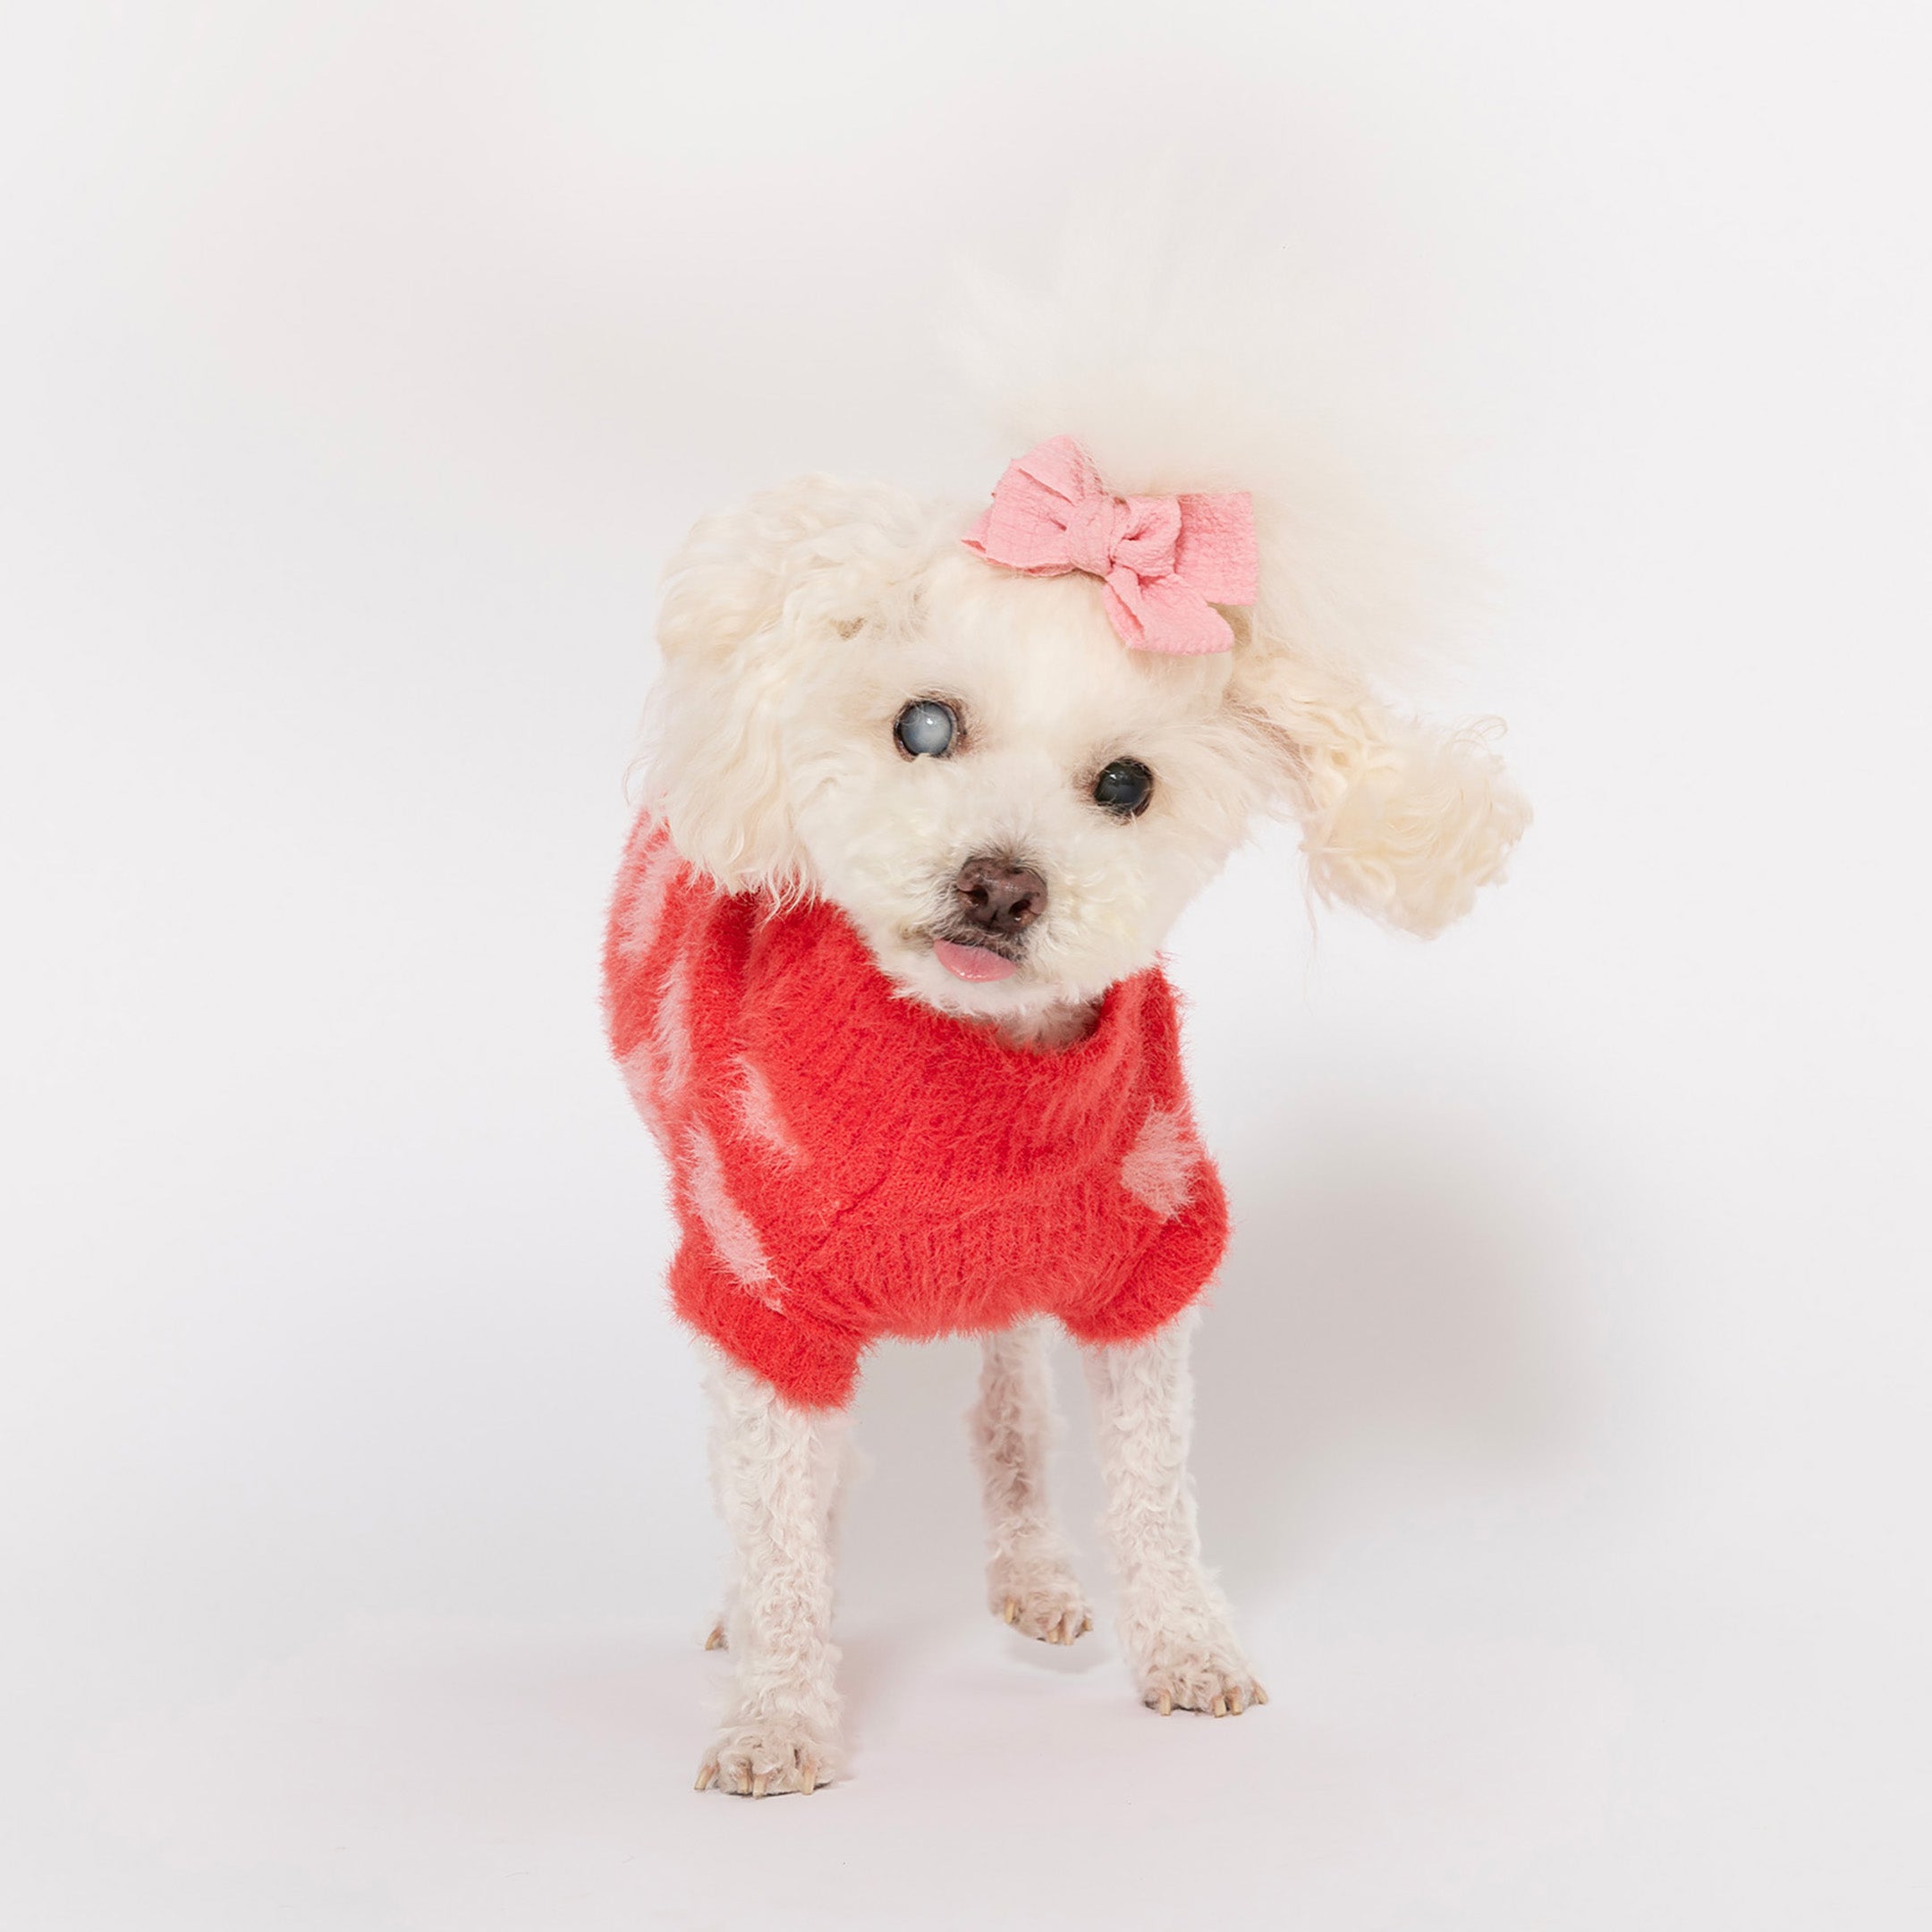 Curious white poodle mix wearing a fluffy red heart-pattern sweater and a pink bow, gazing adorably, isolated on a white backdrop.